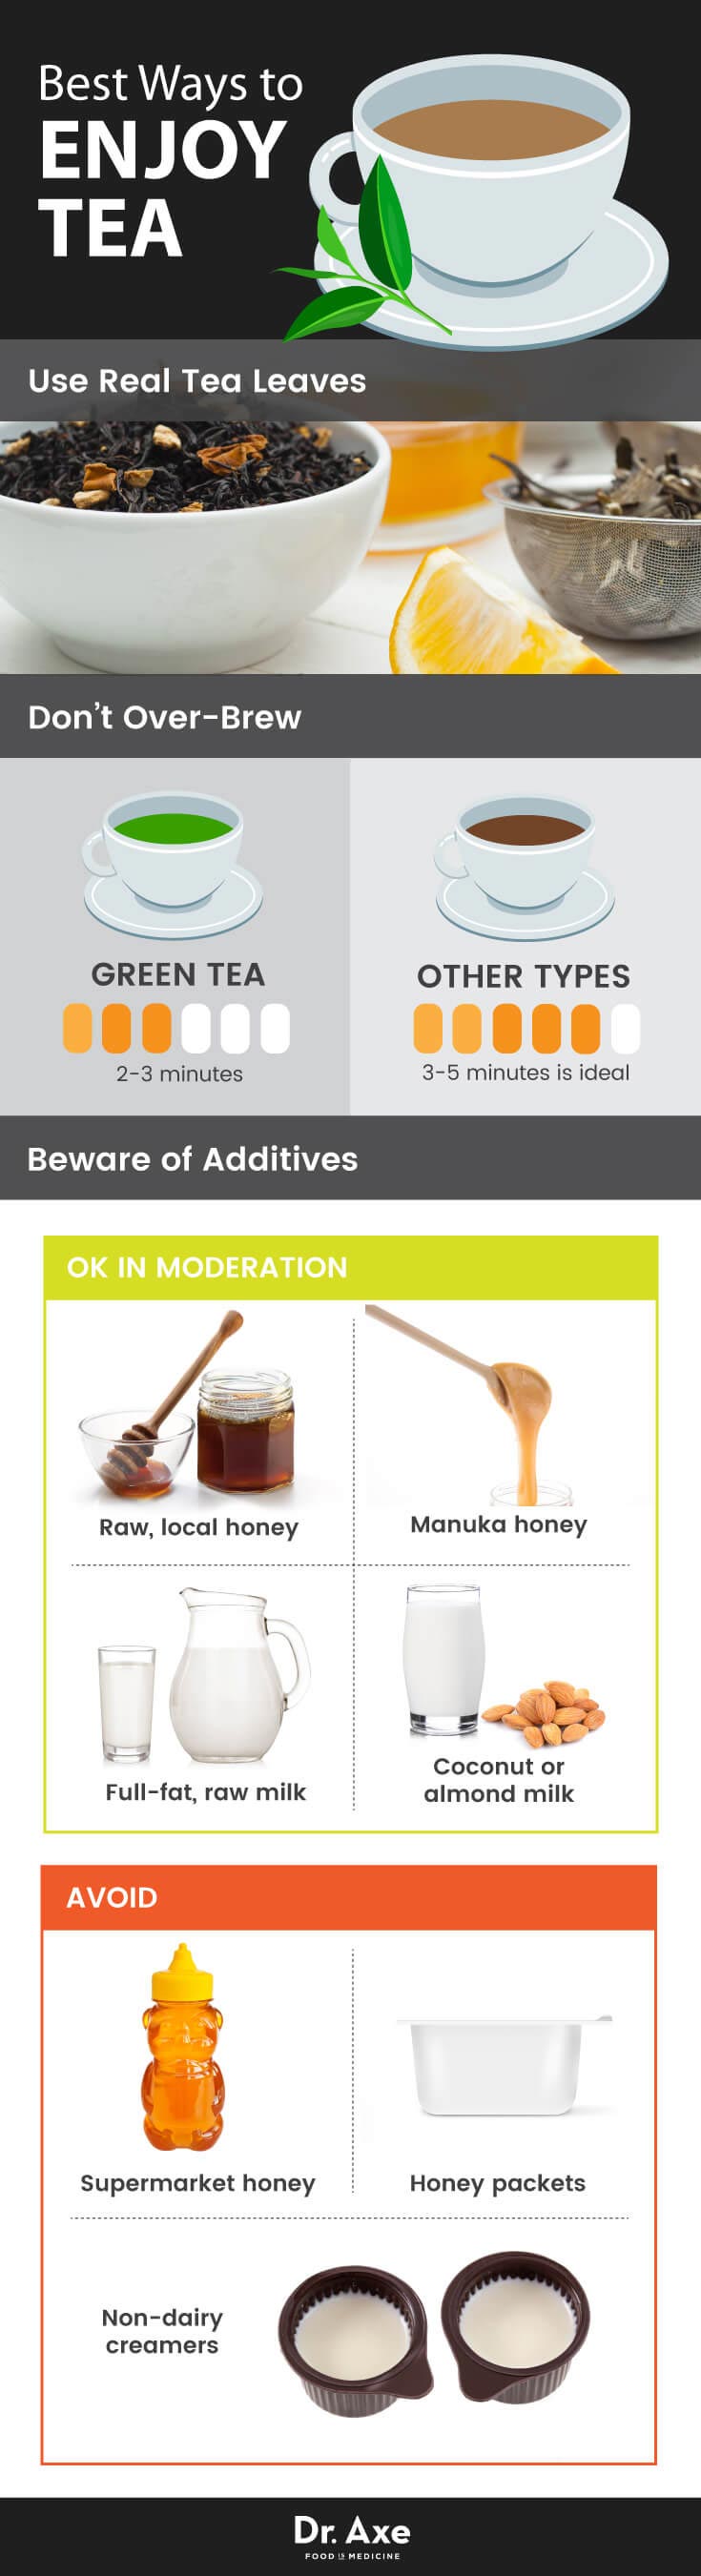 tea-for-alzheimers-graphic